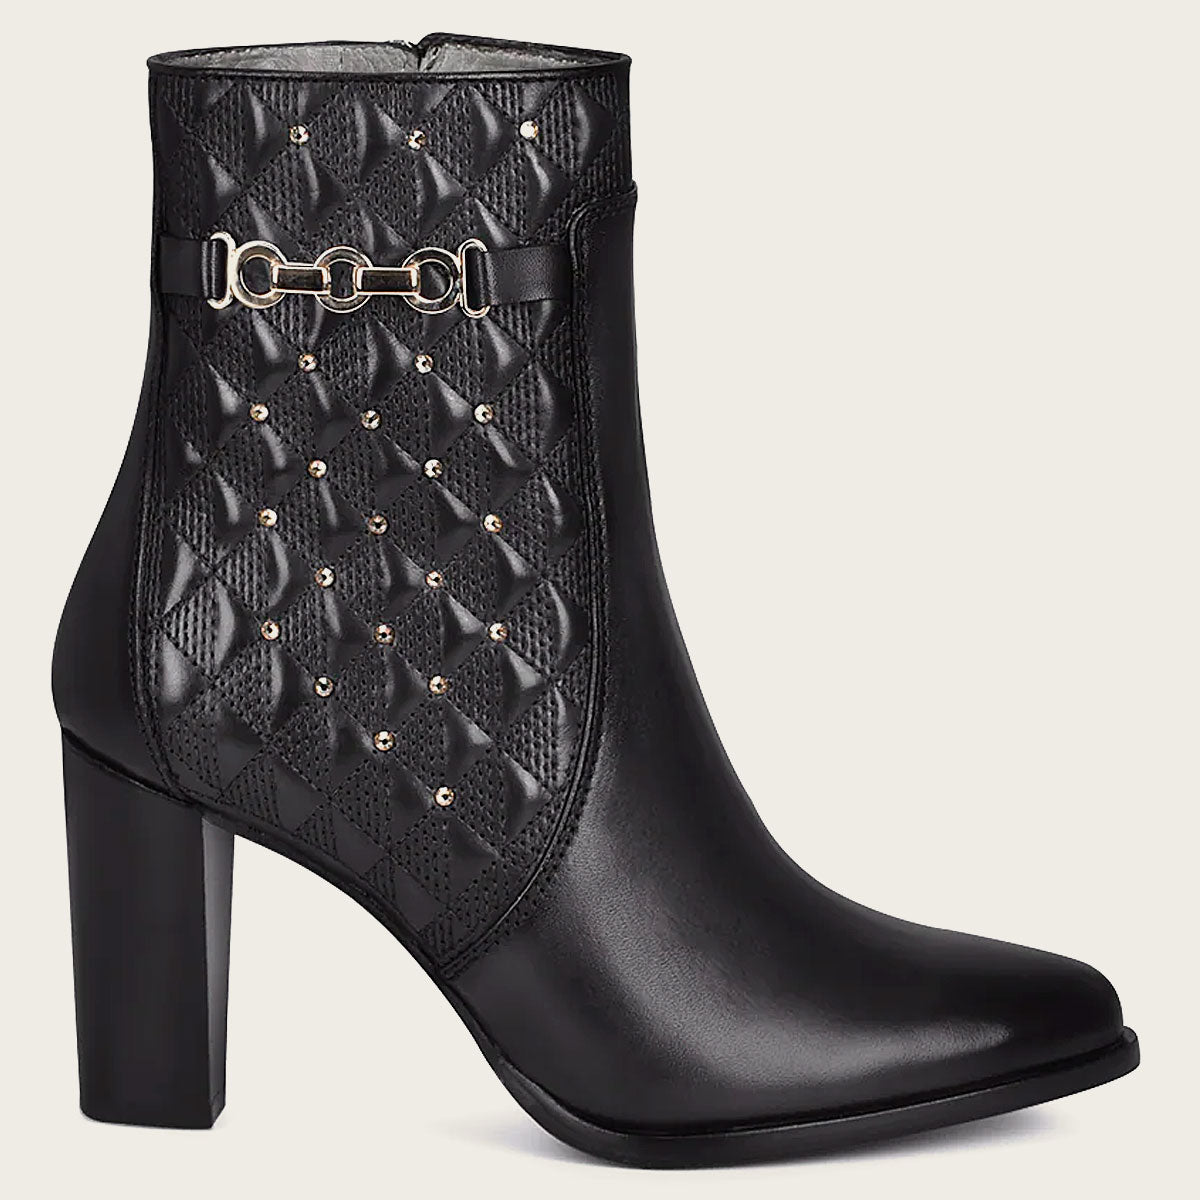 Stunning black leather bootie with intricate geometric details and sparkling Austrian crystals for a chic and glamorous look